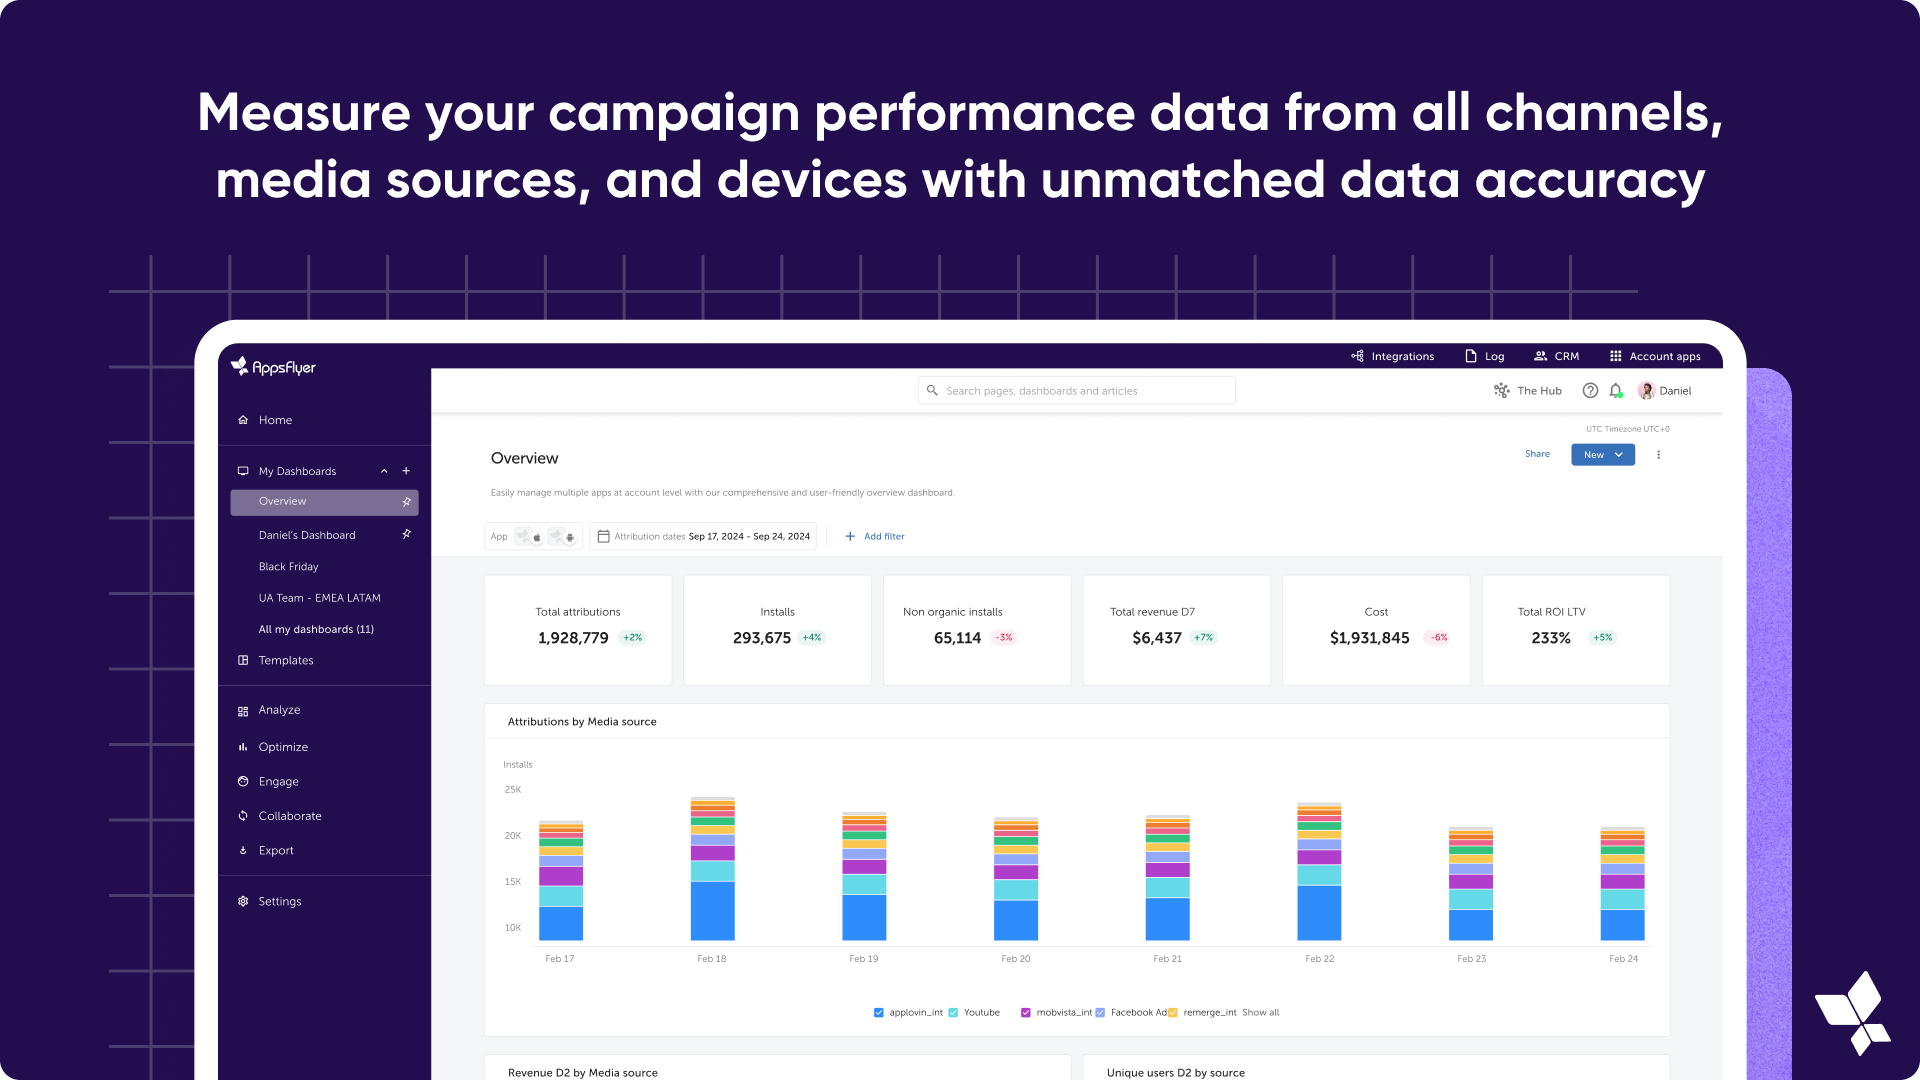 Measure your campaign performance data from all channels, media sourced, and devices with unmatched data accuracy
